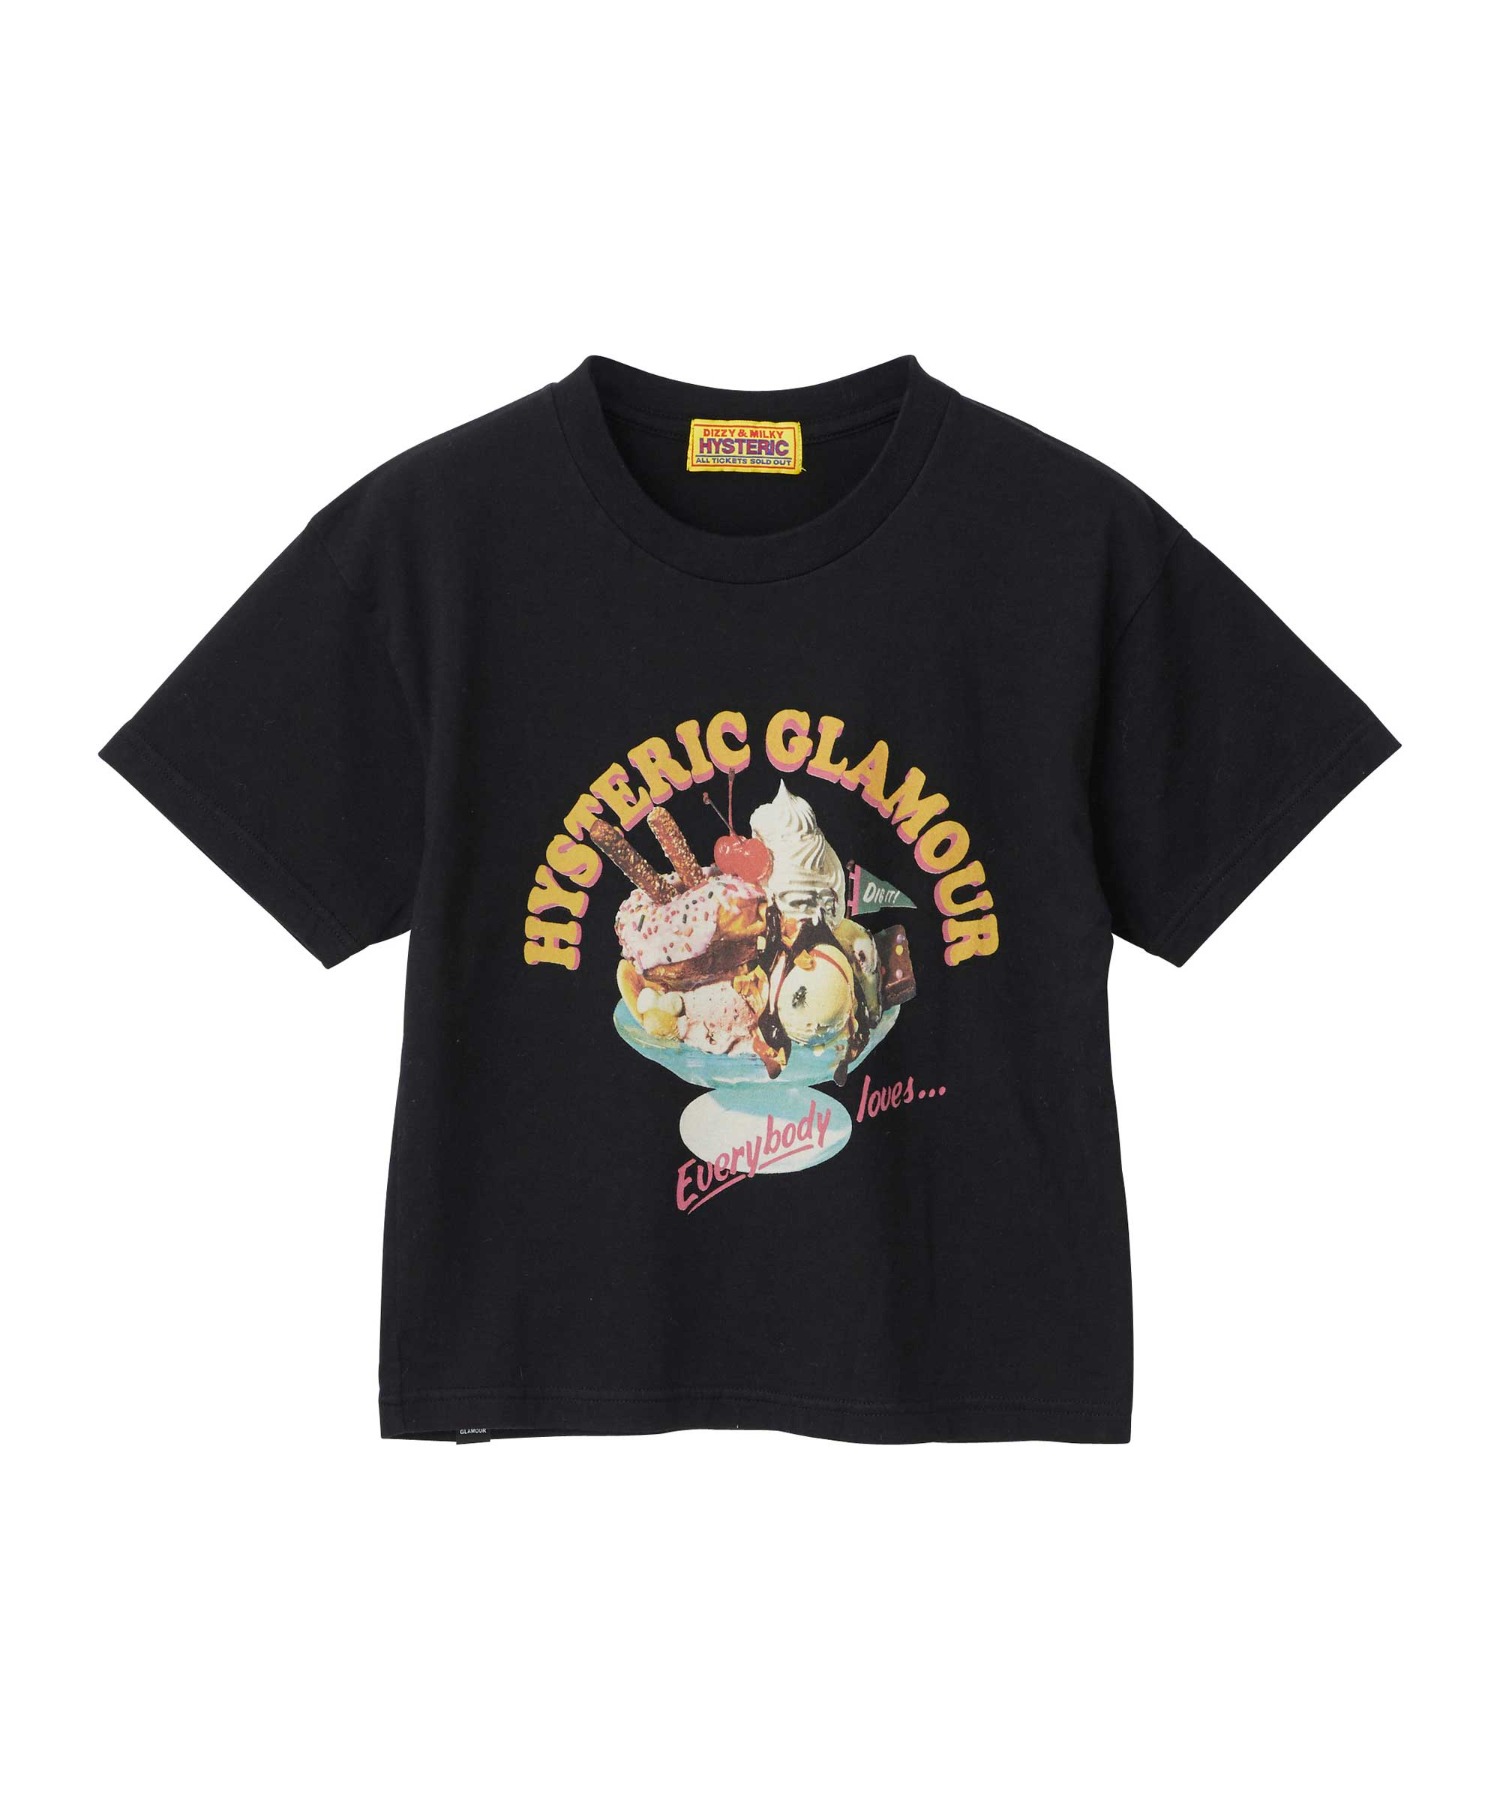 HYSTERIC GLAMOUR シャツ - themirrorofsociety.com